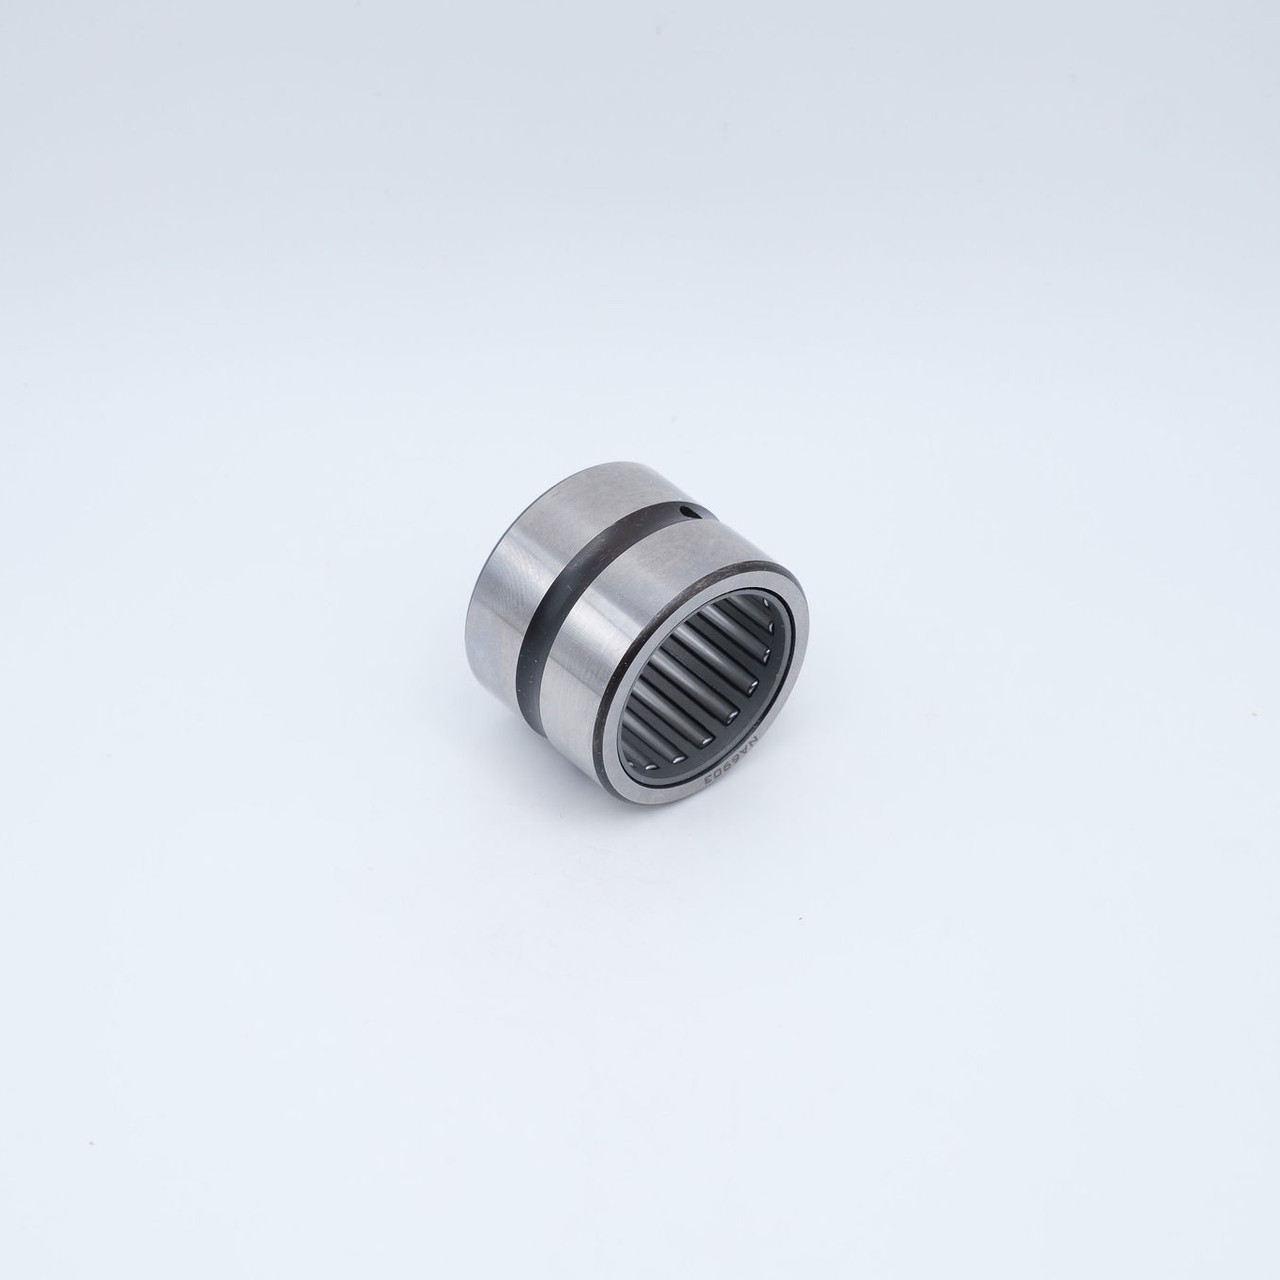 RNA6901 Machined Needle Roller 16x24x22 Angled View